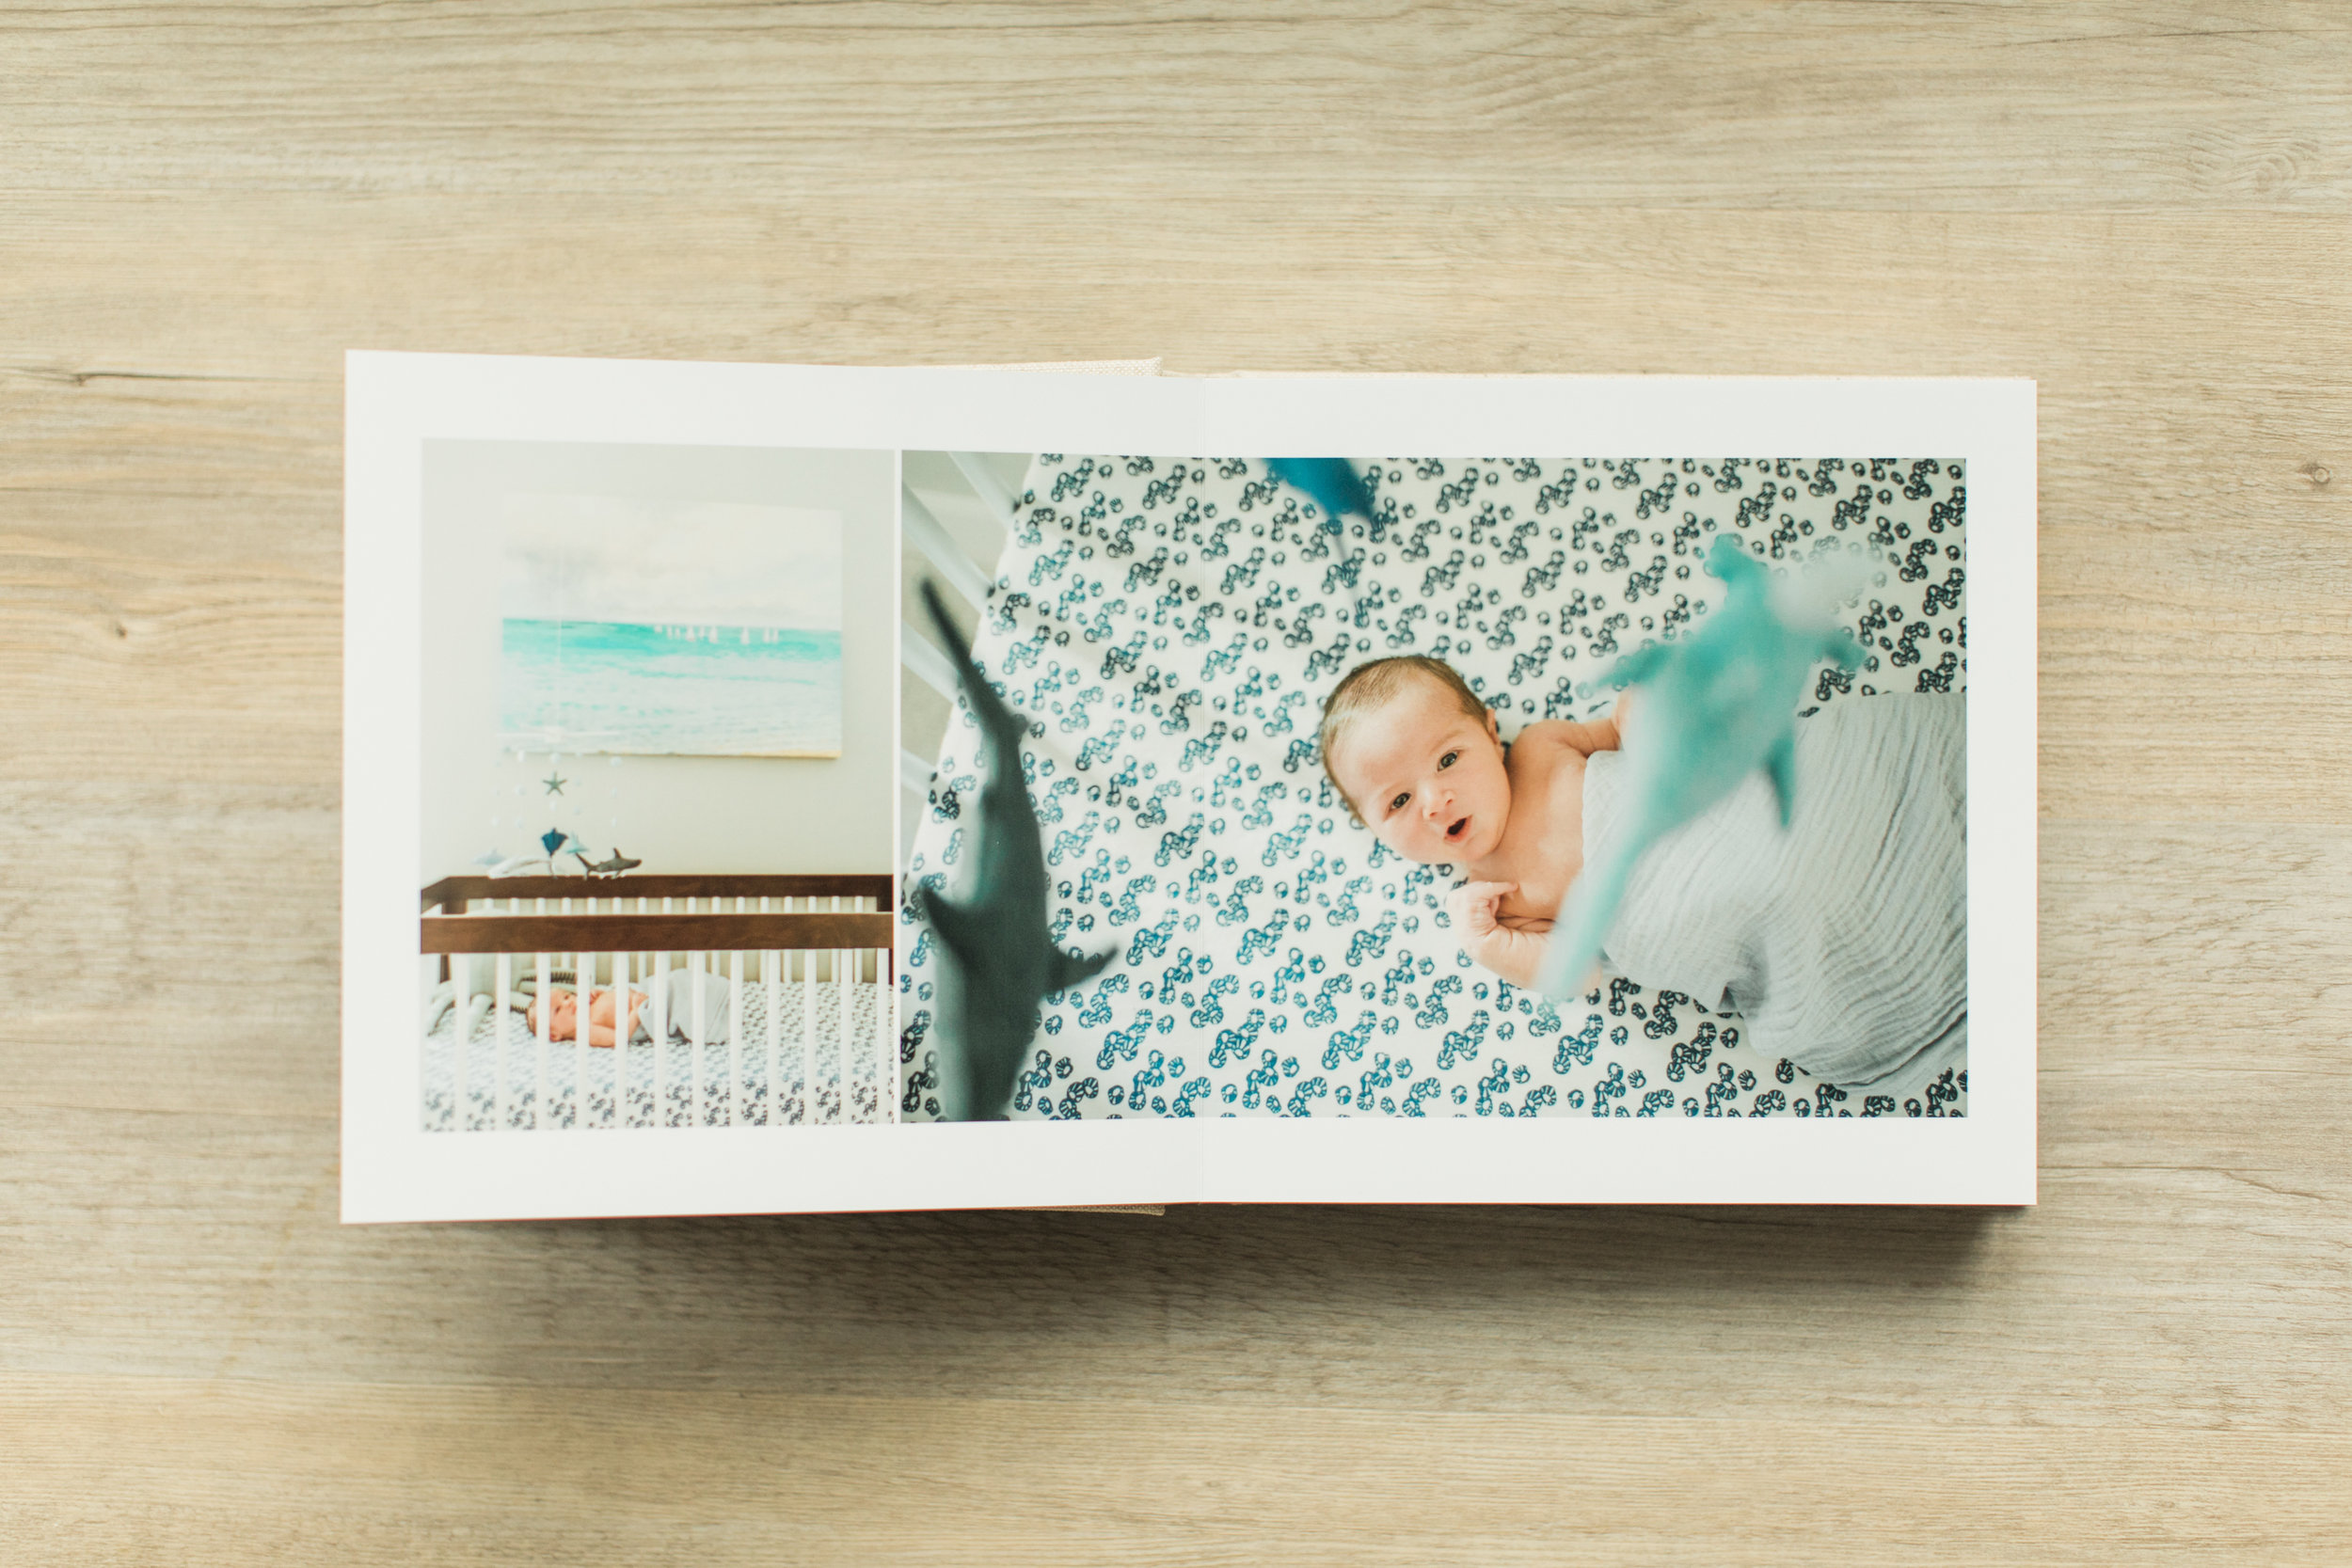 Inside pages of a baby photo album. 